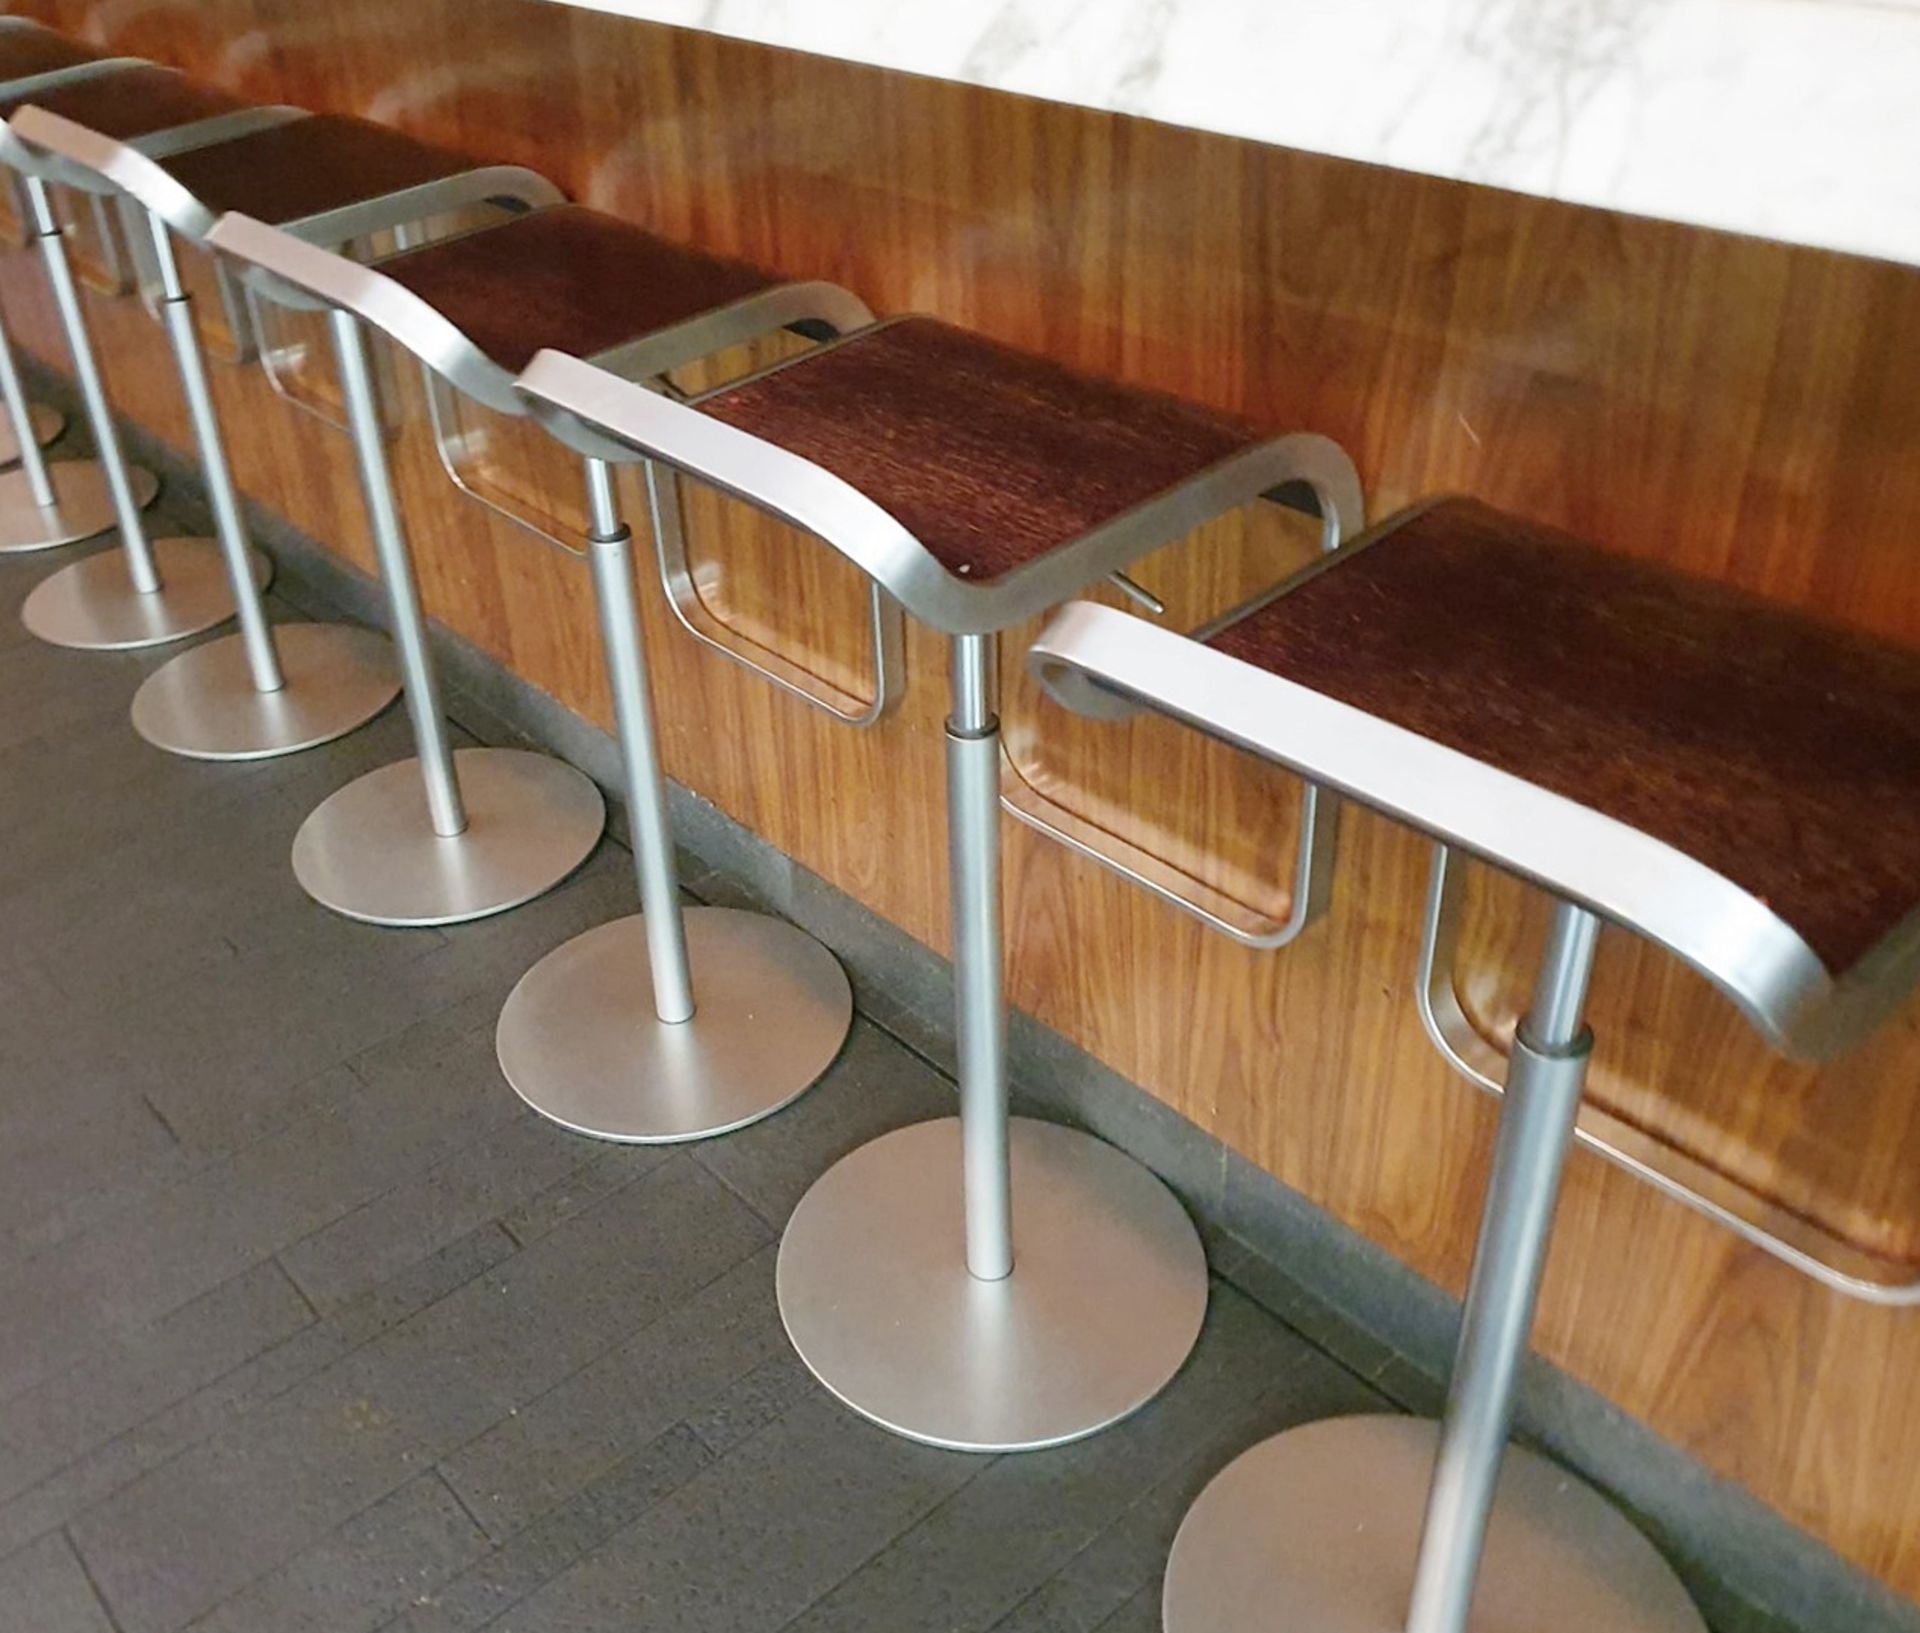 5 x Heavy Duty Commercial Bar Stools With Adjustable Hydraulic Aided Height - Dimensions: 35cm x - Image 2 of 8